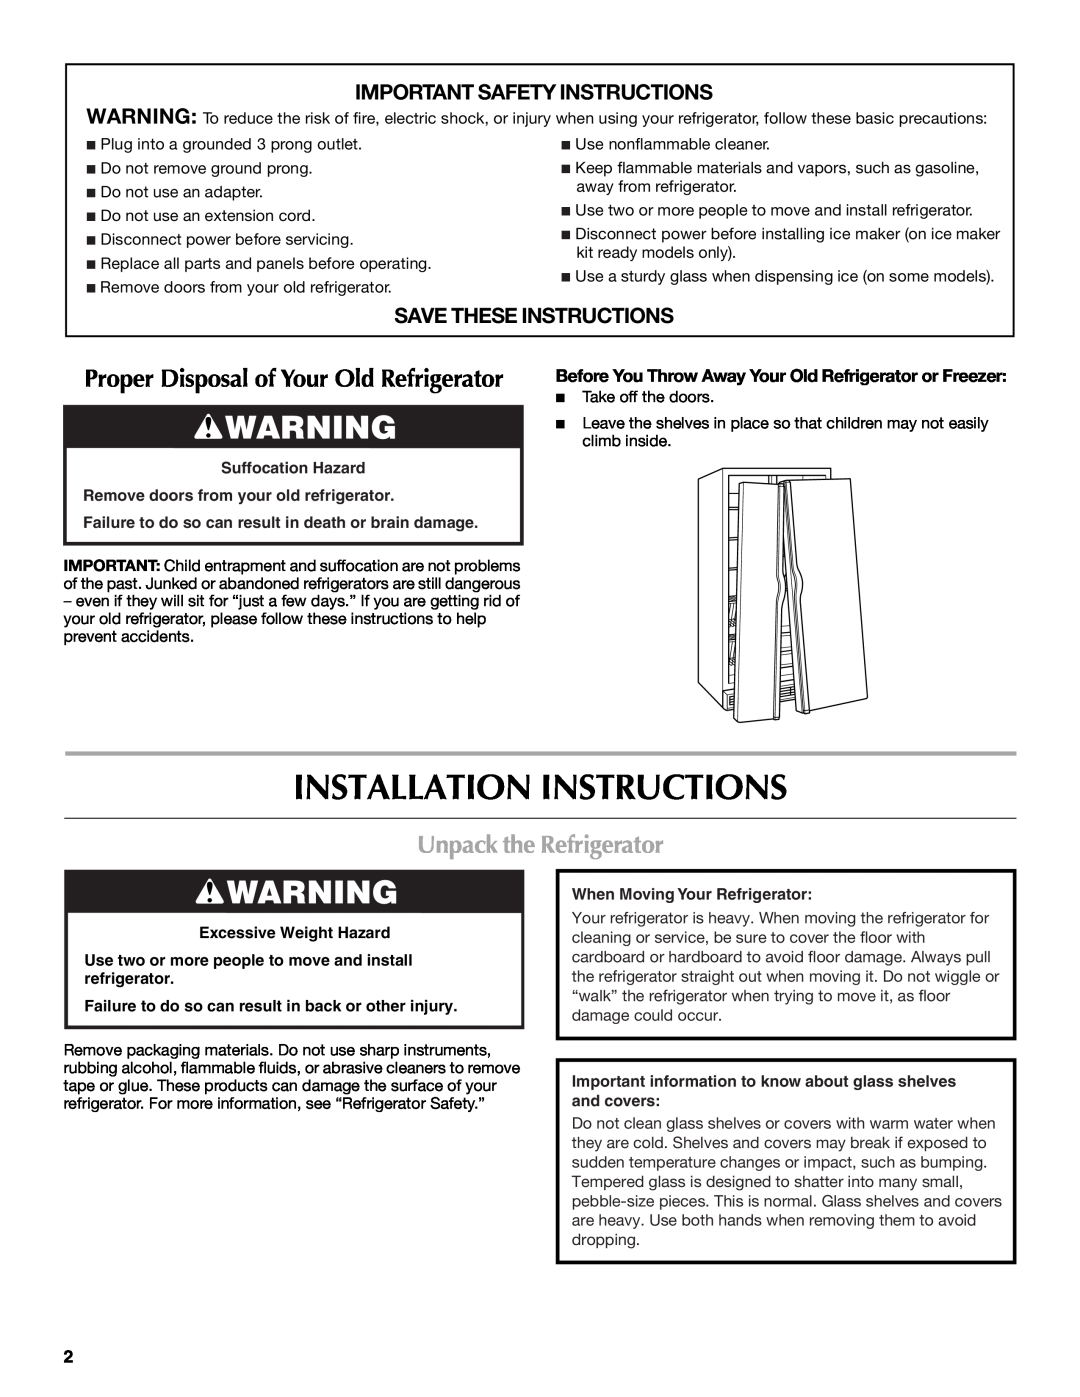 Maytag W10216883A Installation Instructions, Unpack the Refrigerator, Important Safety Instructions, Suffocation Hazard 